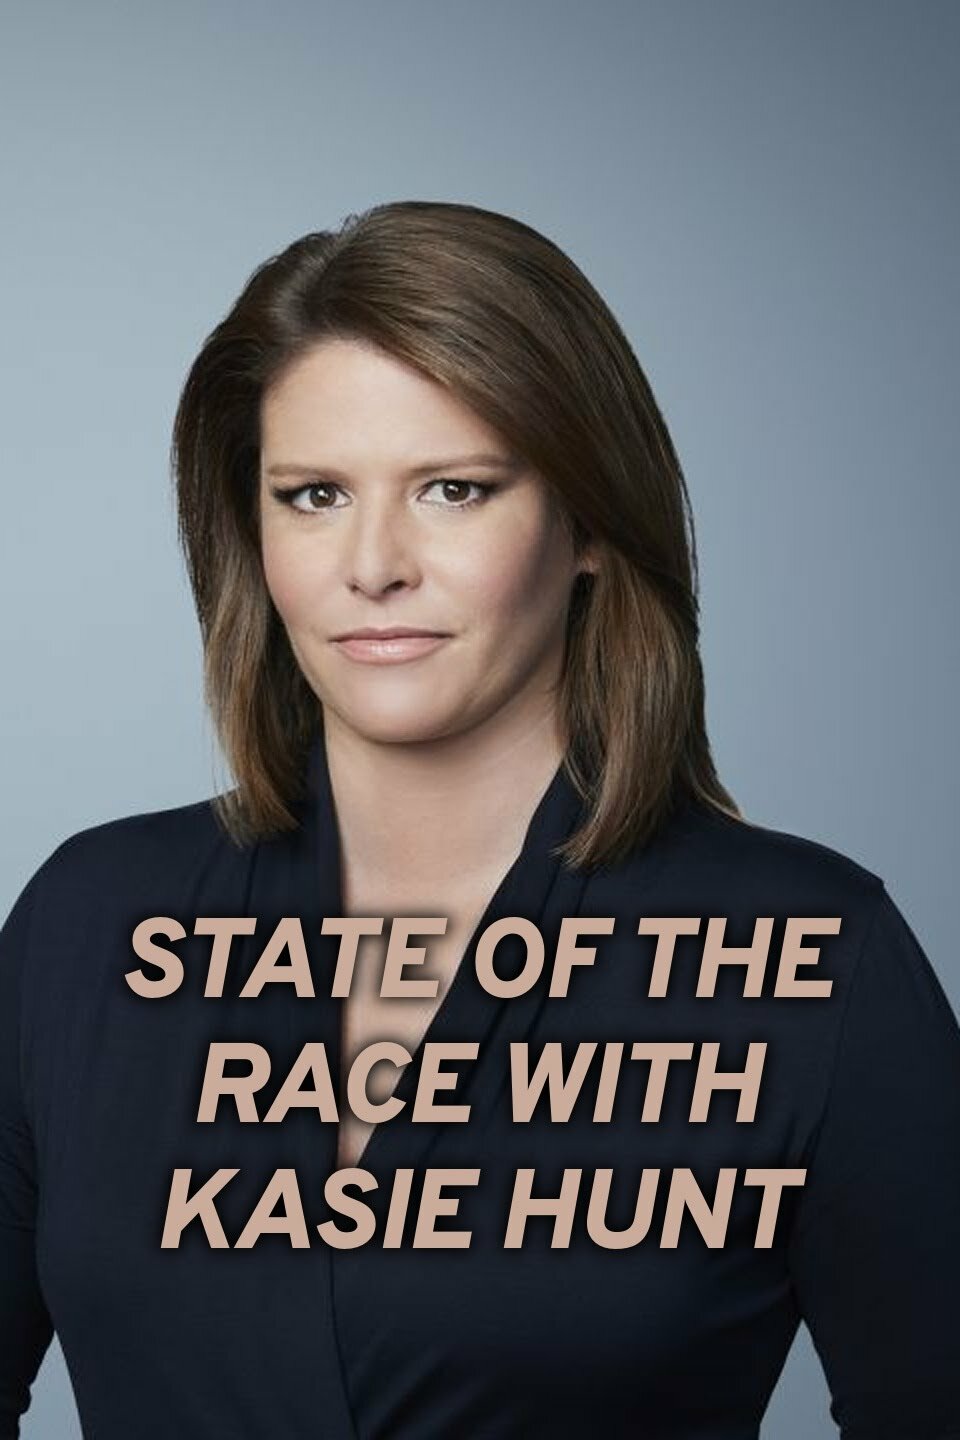 State of the Race with Kasie Hunt ne zaman